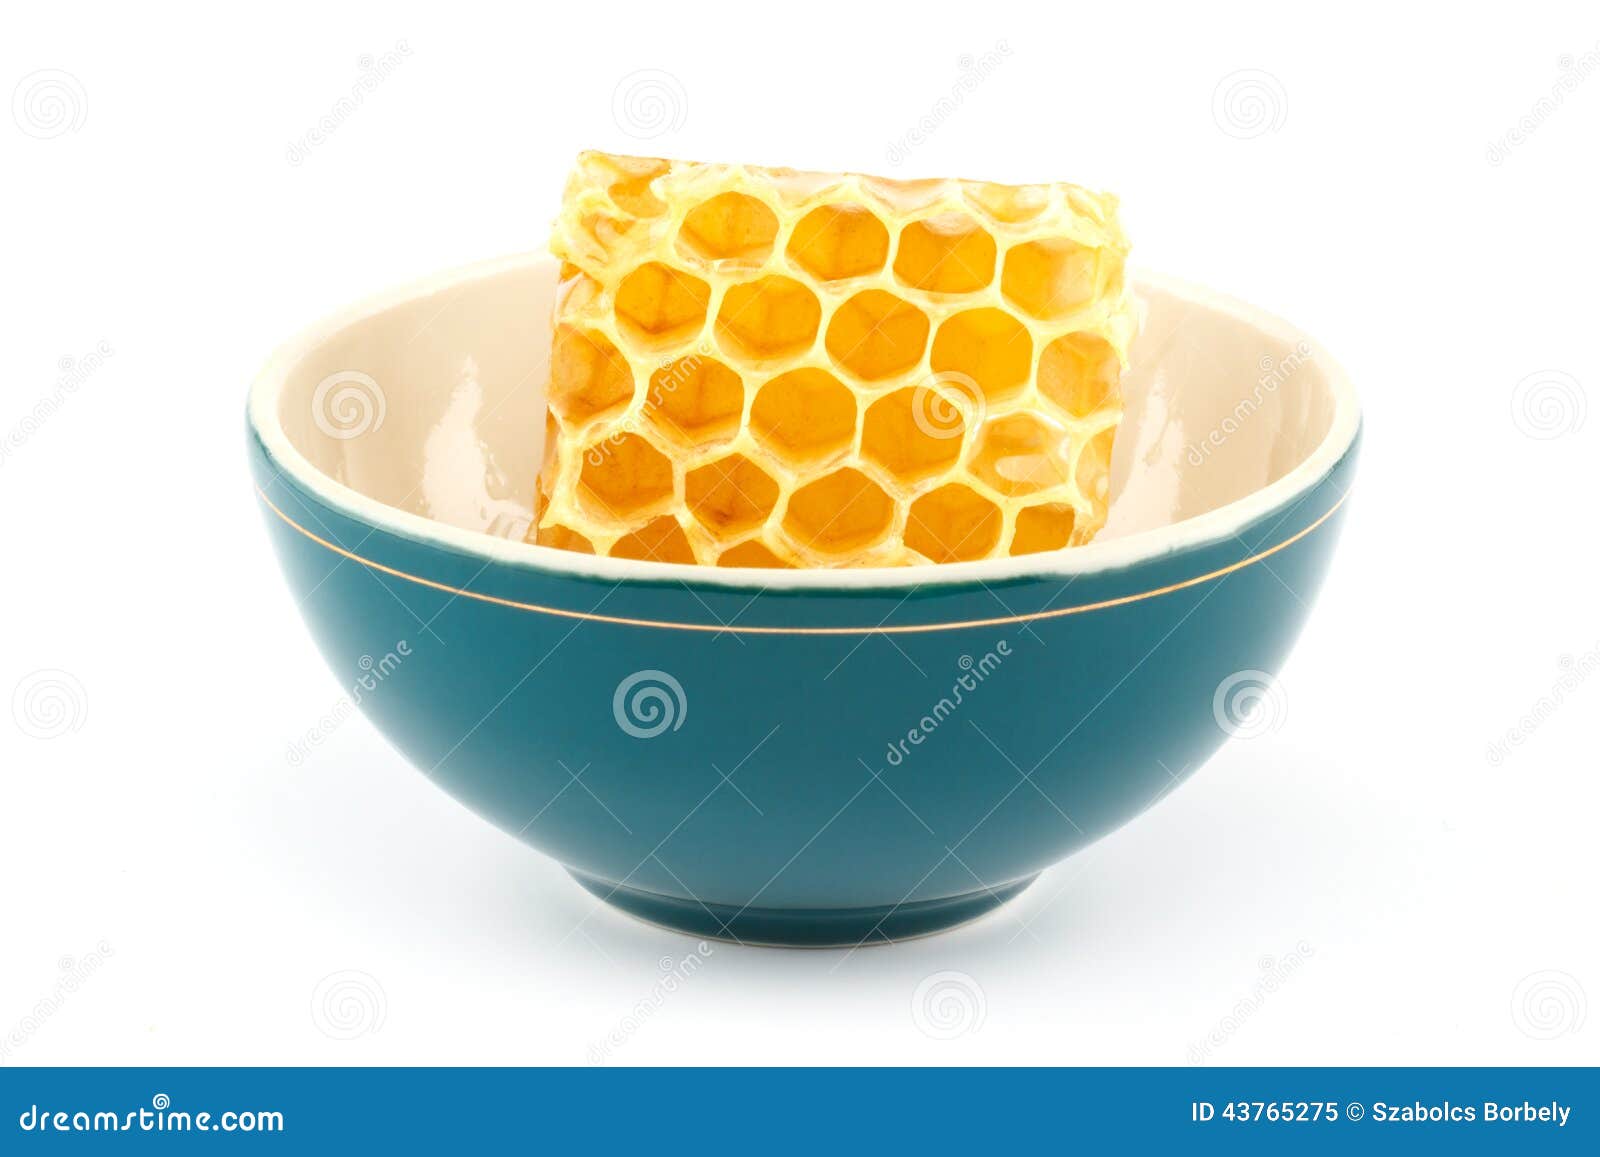 Honeycomb in bowl. Honeycomb in green porcelain bowl on white isolated background